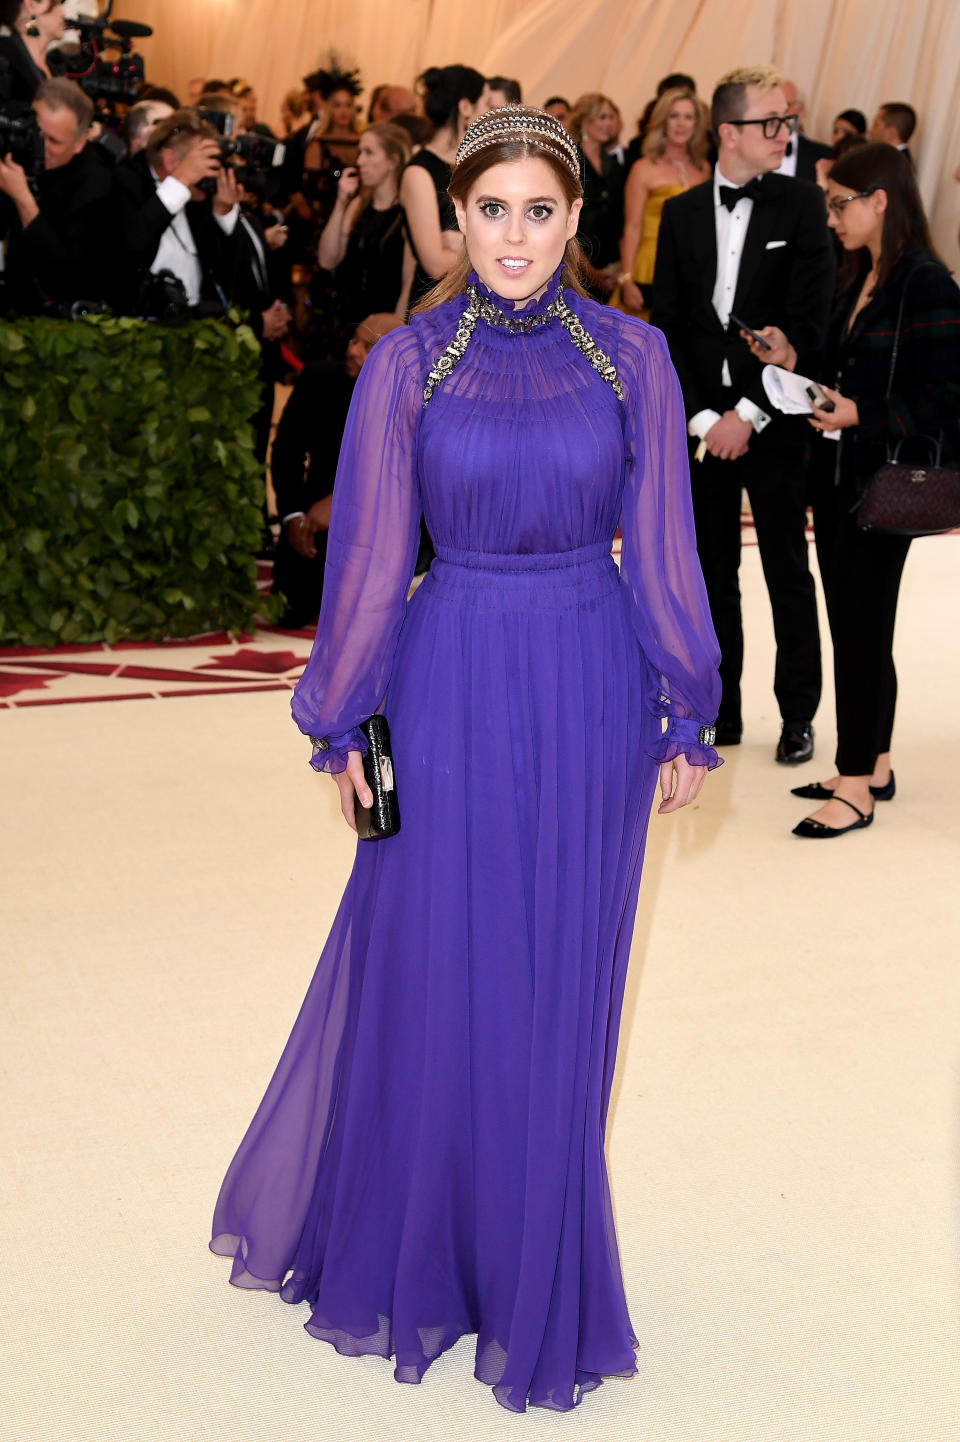 <p>Royalty arrived on the Met Gala red capet in the form of Princess Beatrice, who wore a purple gown with long schiffon sleeves and gold headpice. Photo: Getty Images </p>